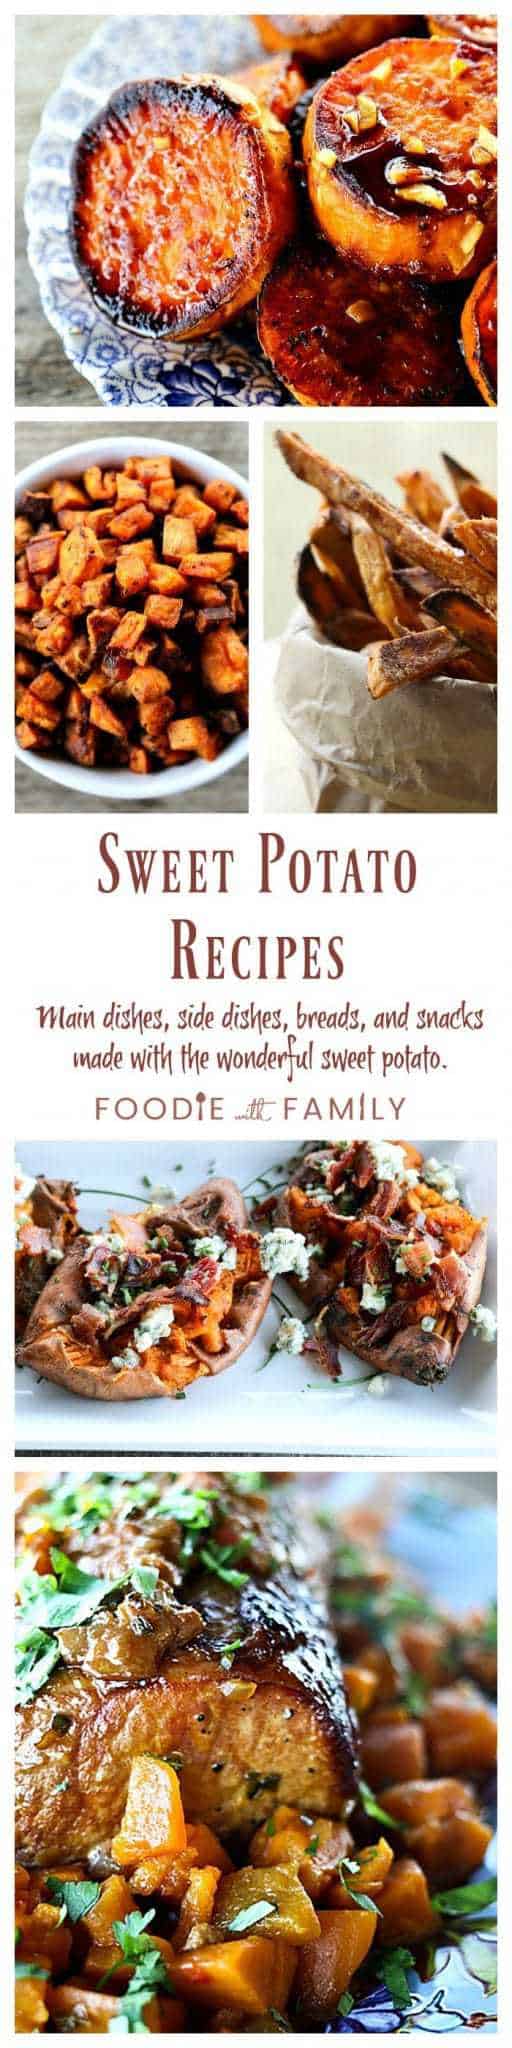 Sweet Potato Recipes for every occasion from Foodie with Family. Melting Sweet Potatoes, Smashed Sweet Potatoes with Bacon and Bleu Cheese, Crispy Baked Sweet Potato Fries, and more!